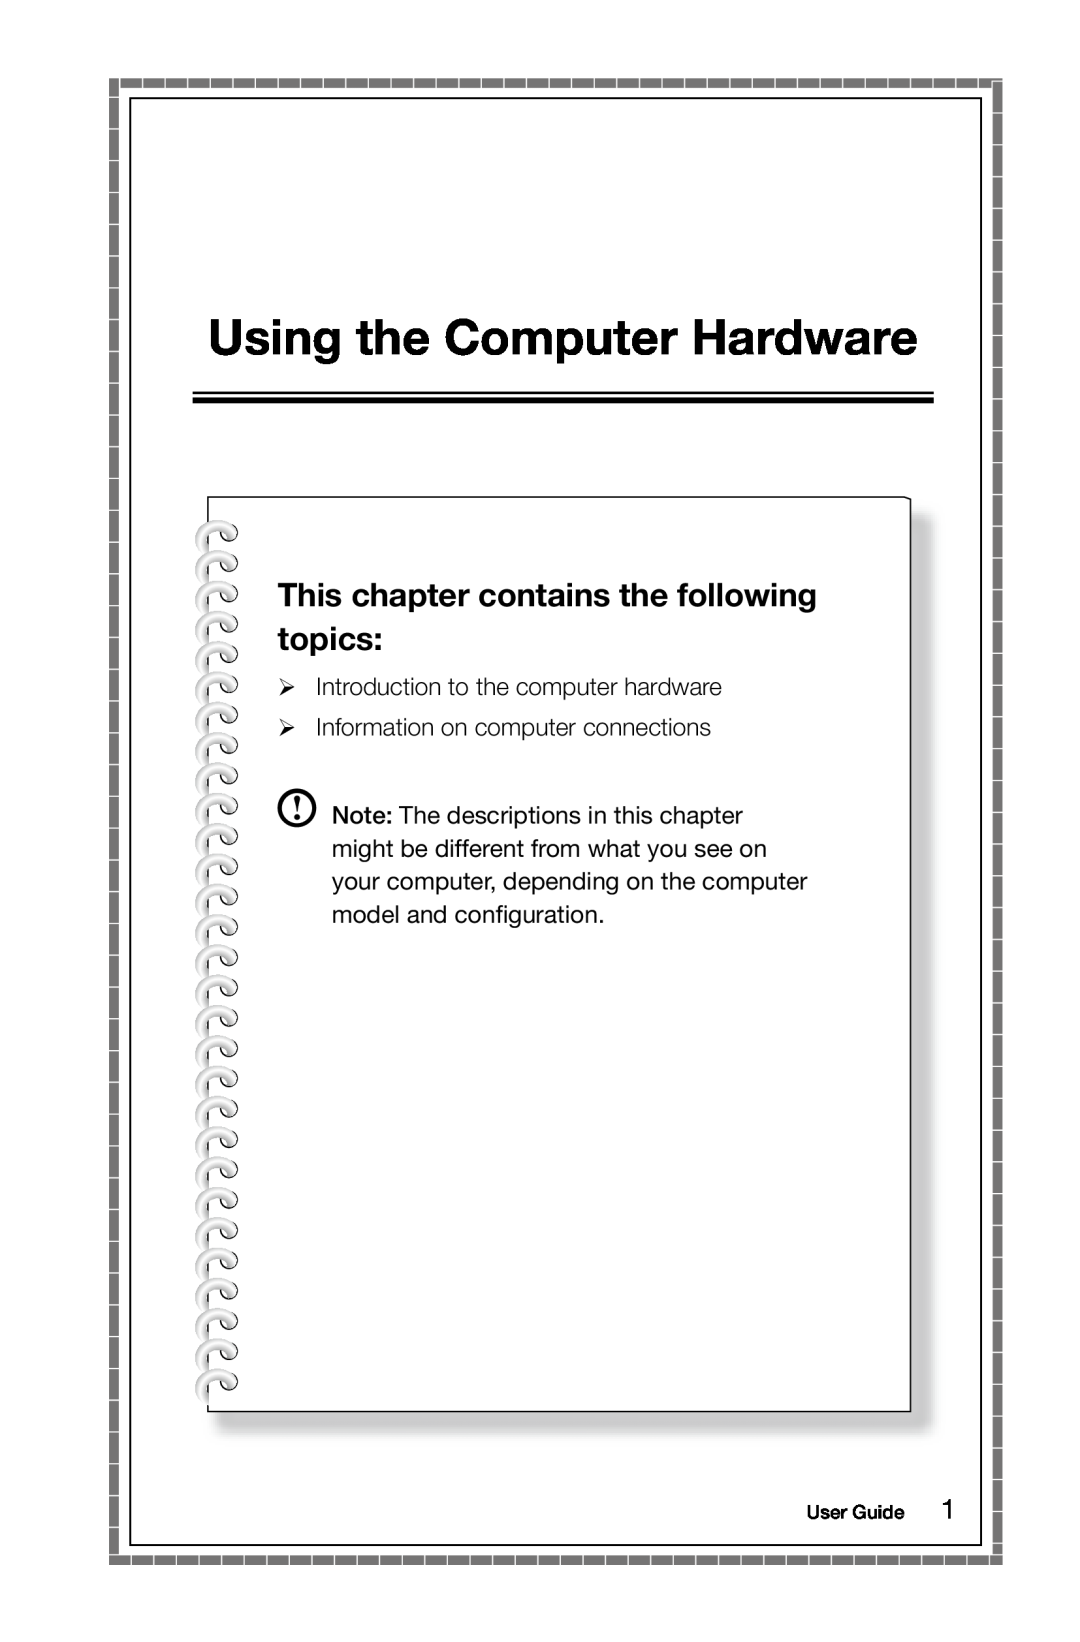 Lenovo 10120/90A0 [K450 NON-ES] manual Using the Computer Hardware, This chapter contains the following topics, User Guide 